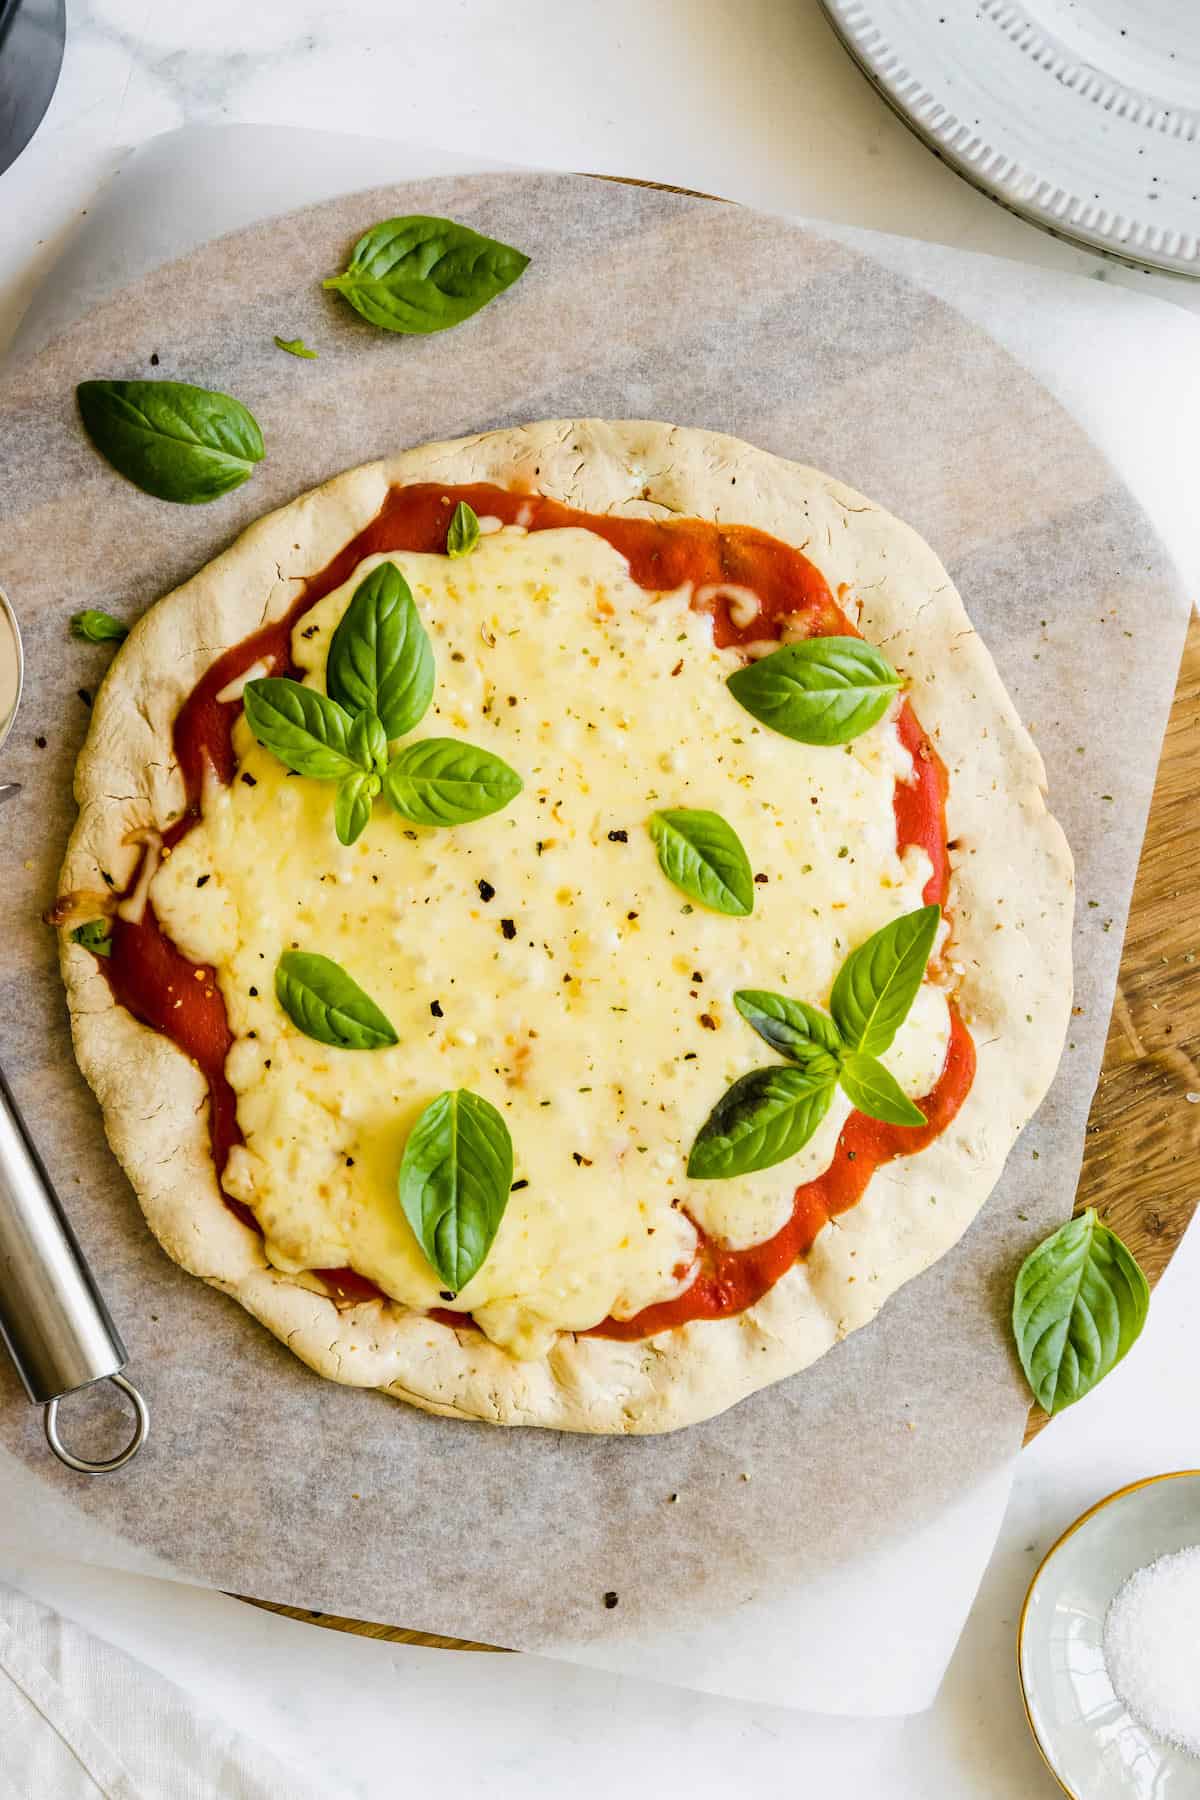 An Uncut Gluten-Free Pizza Sitting on a Wooden Pizza Stone